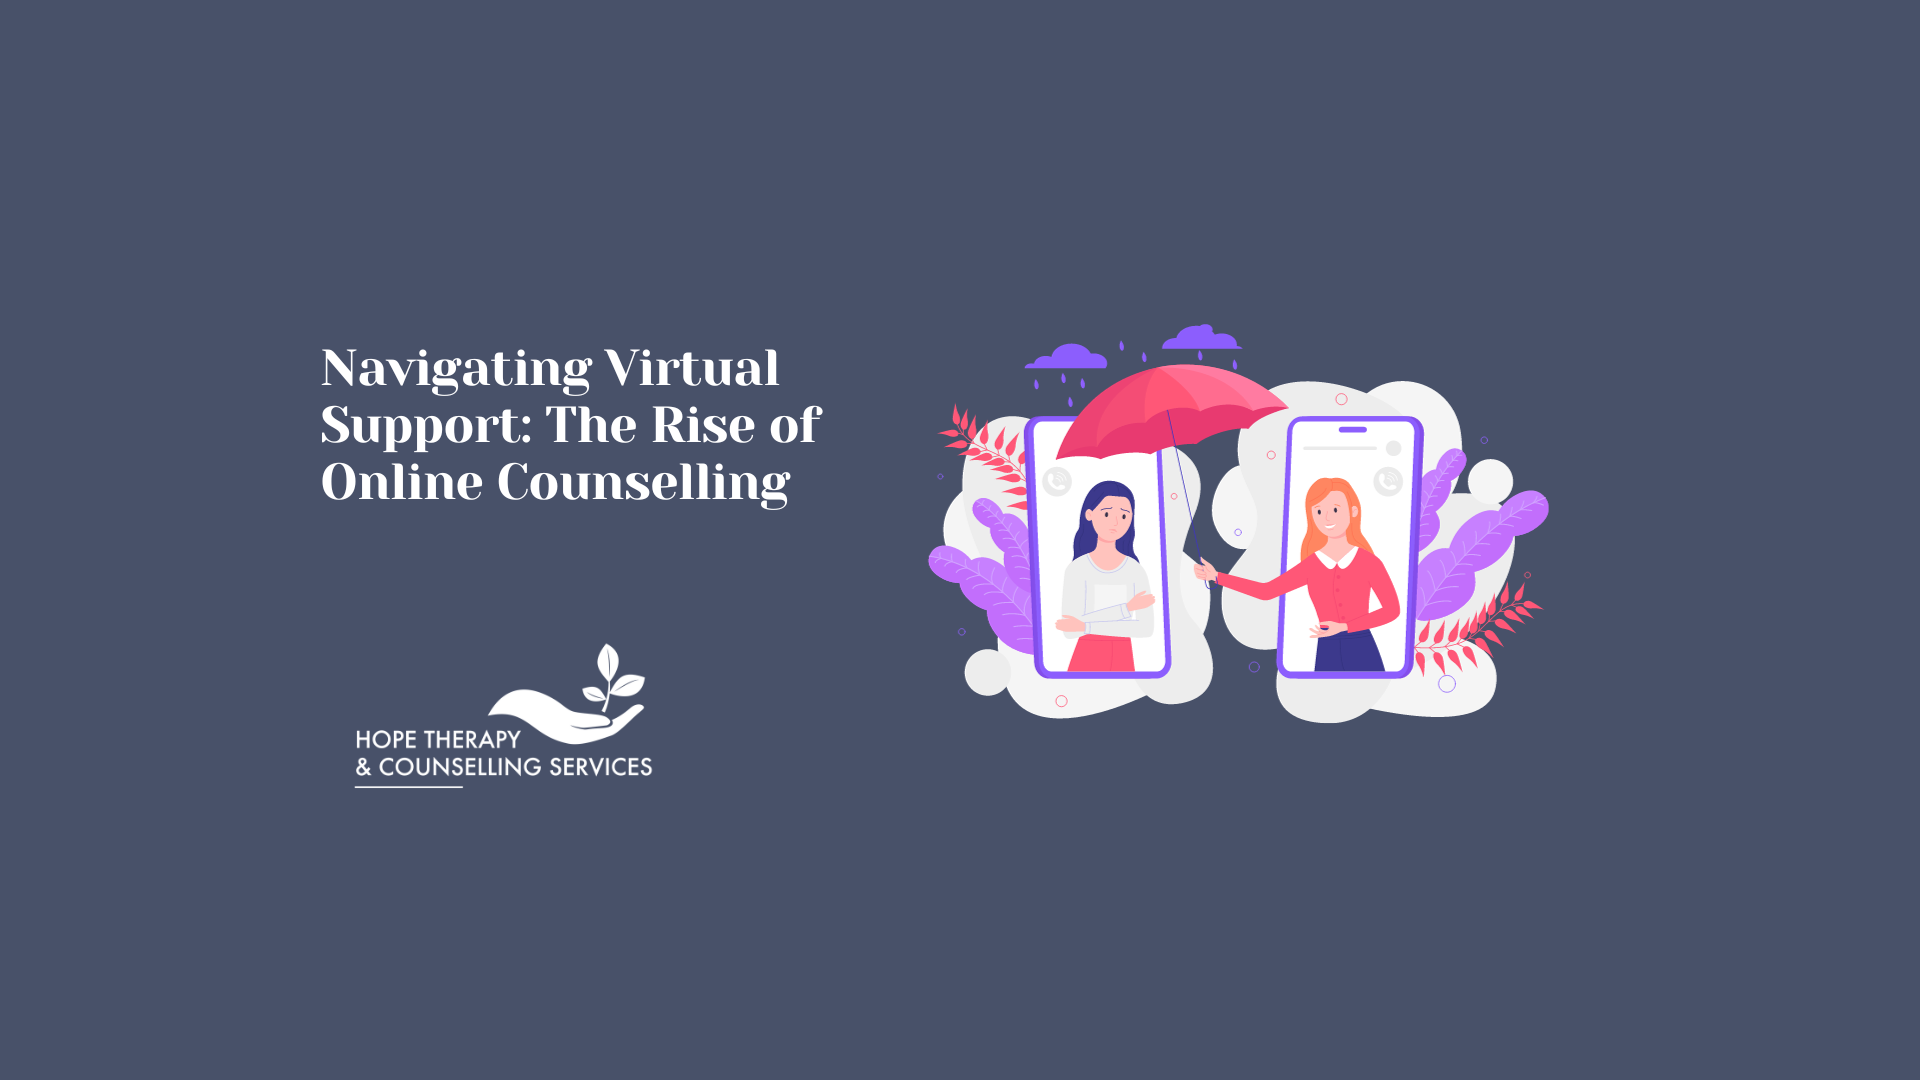 Navigating Virtual Support: The Rise of Online Counselling